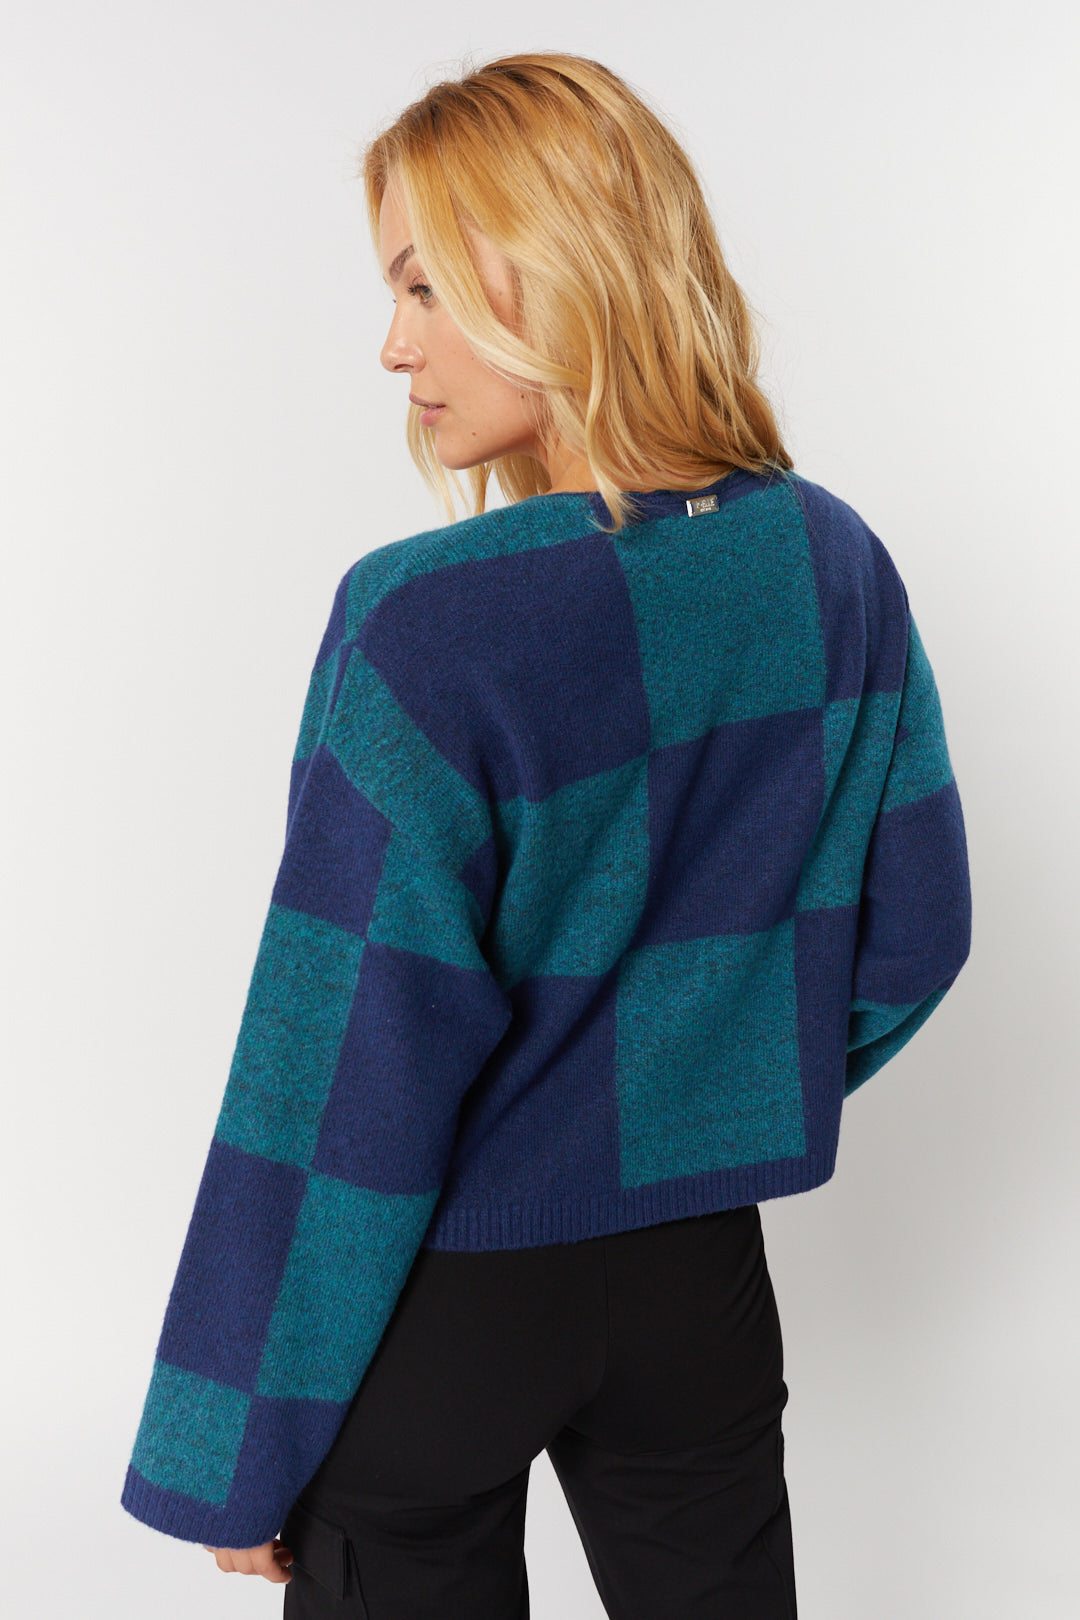 Teal and Blue Plaid Knit Sweater | Check